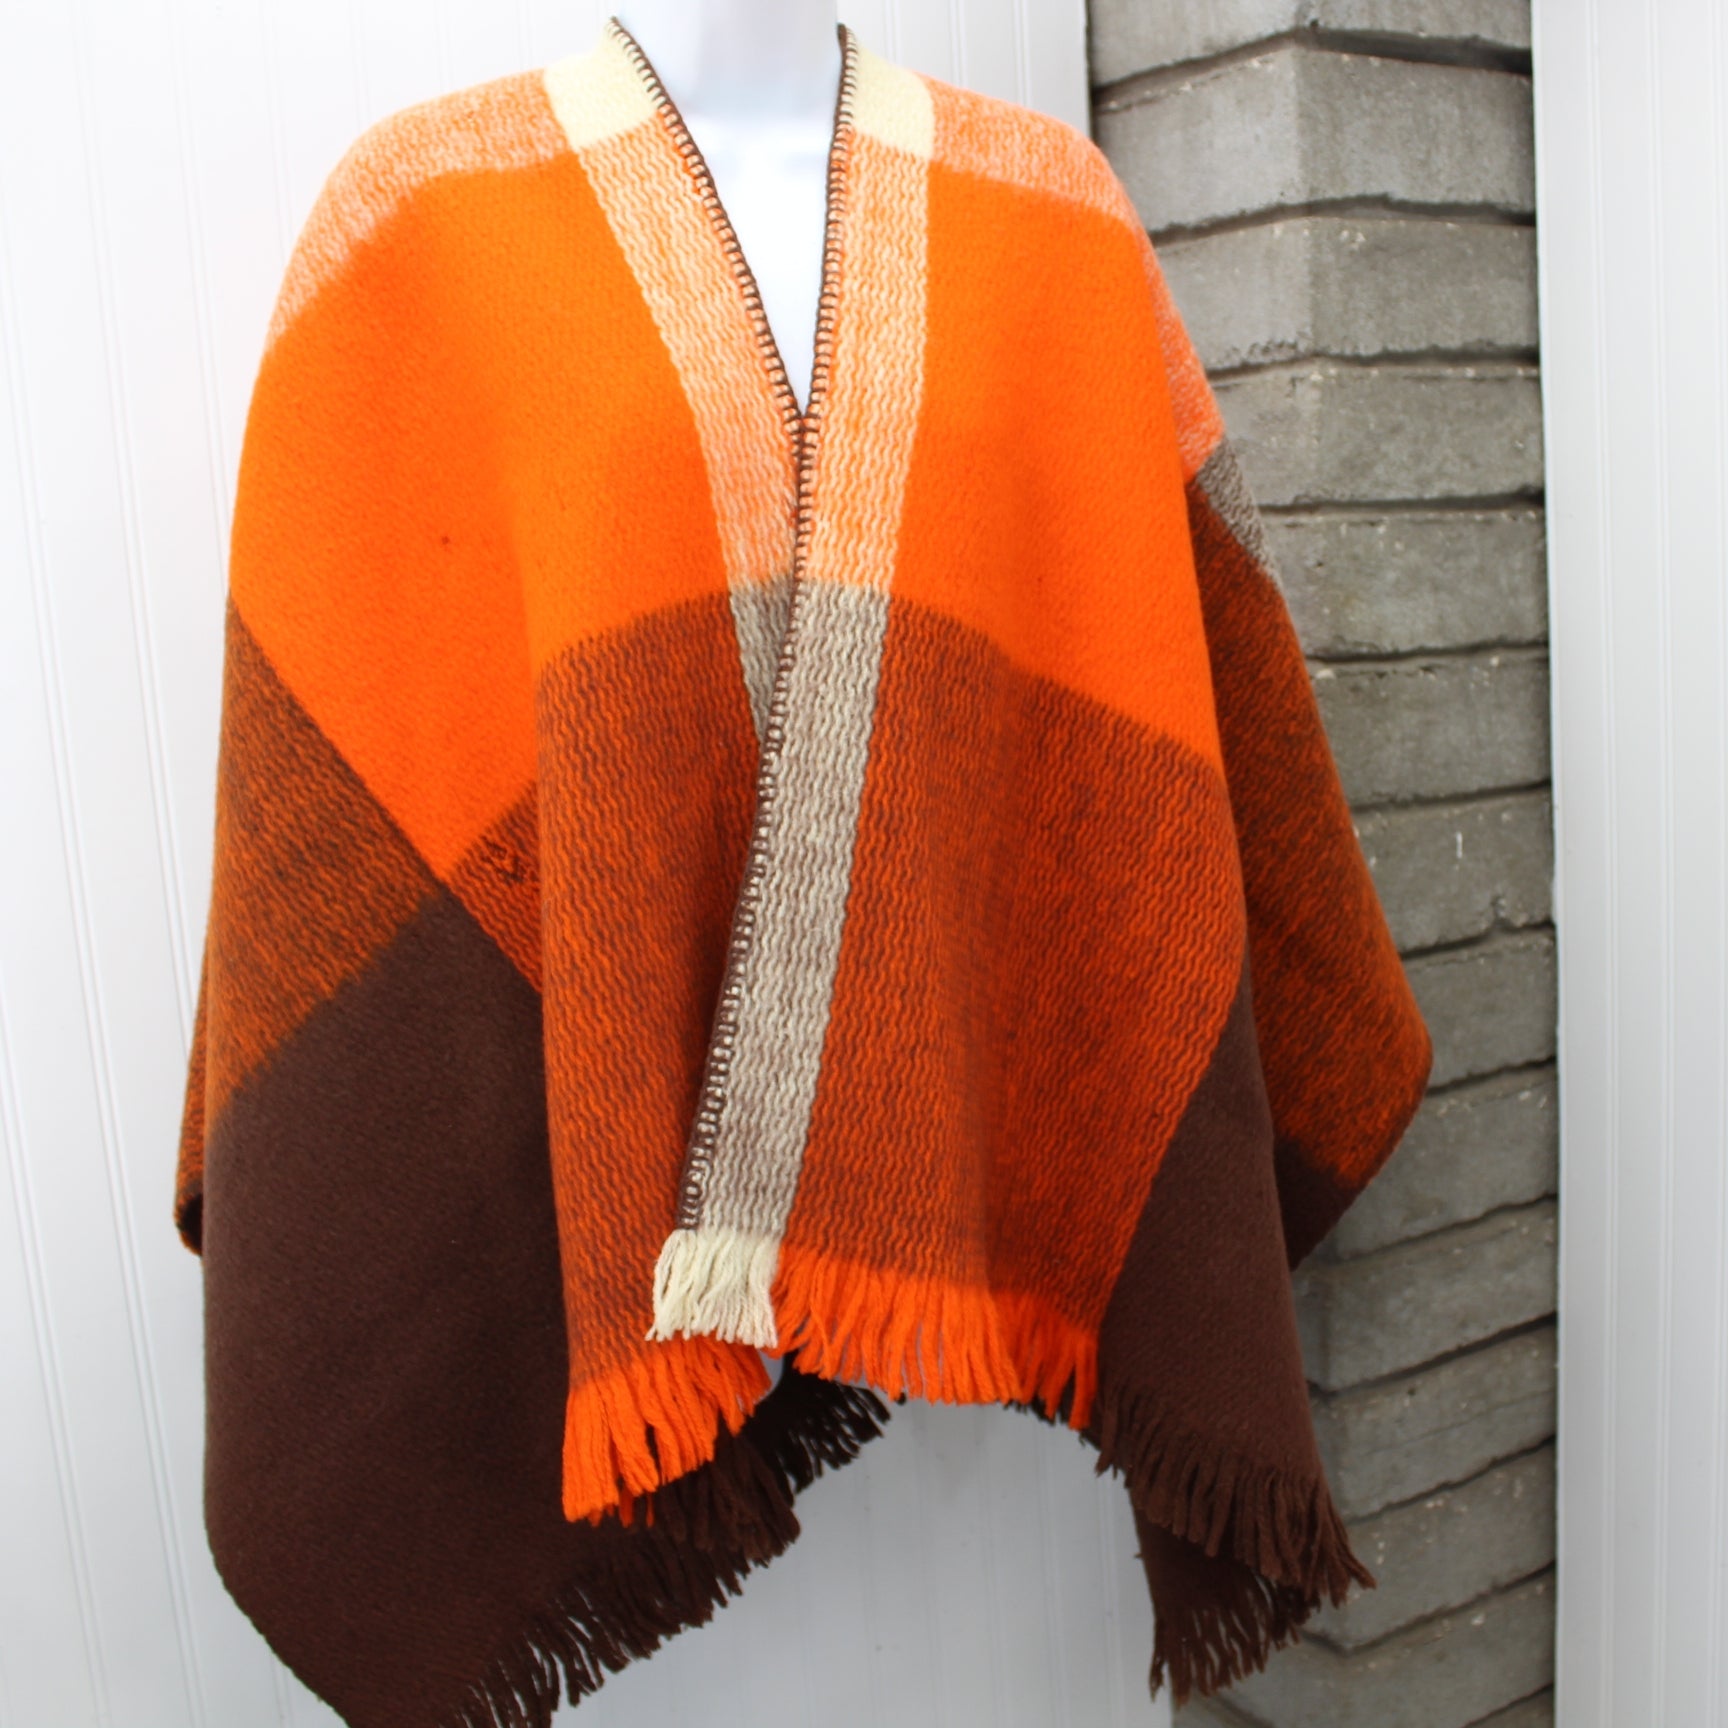 Ruana Shawl Andes Style Wool Orange Cream Brown Usable or Cutter